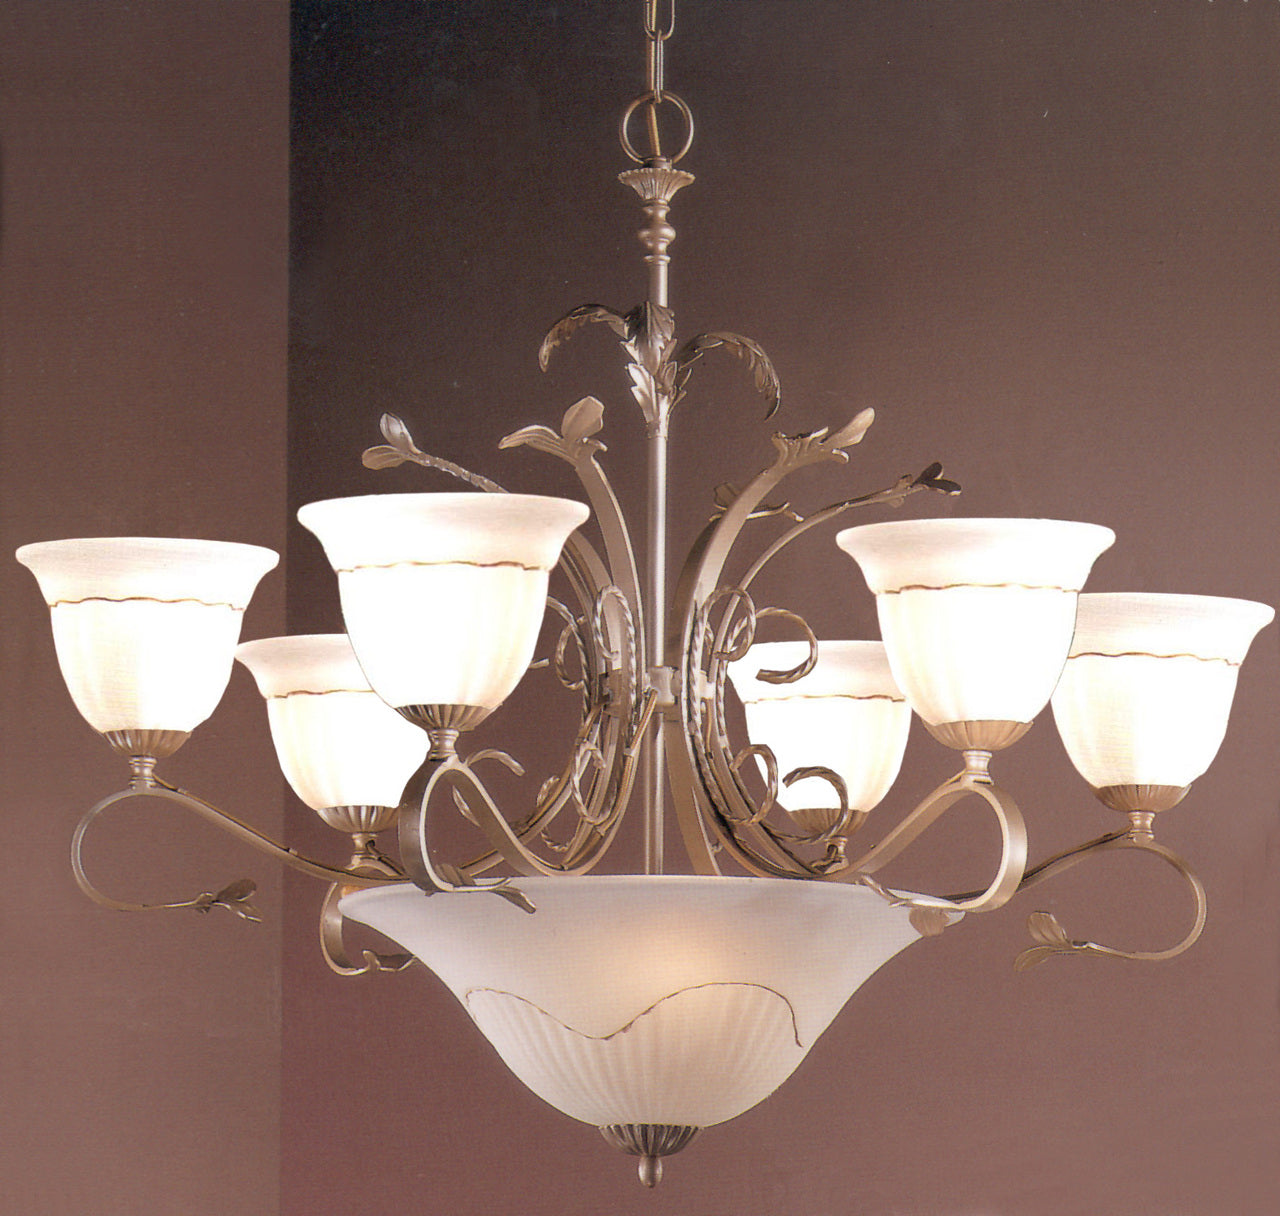 Classic Lighting 4119 PG Treviso Wrought Iron Chandelier in Pearlized Gold (Imported from Italy)